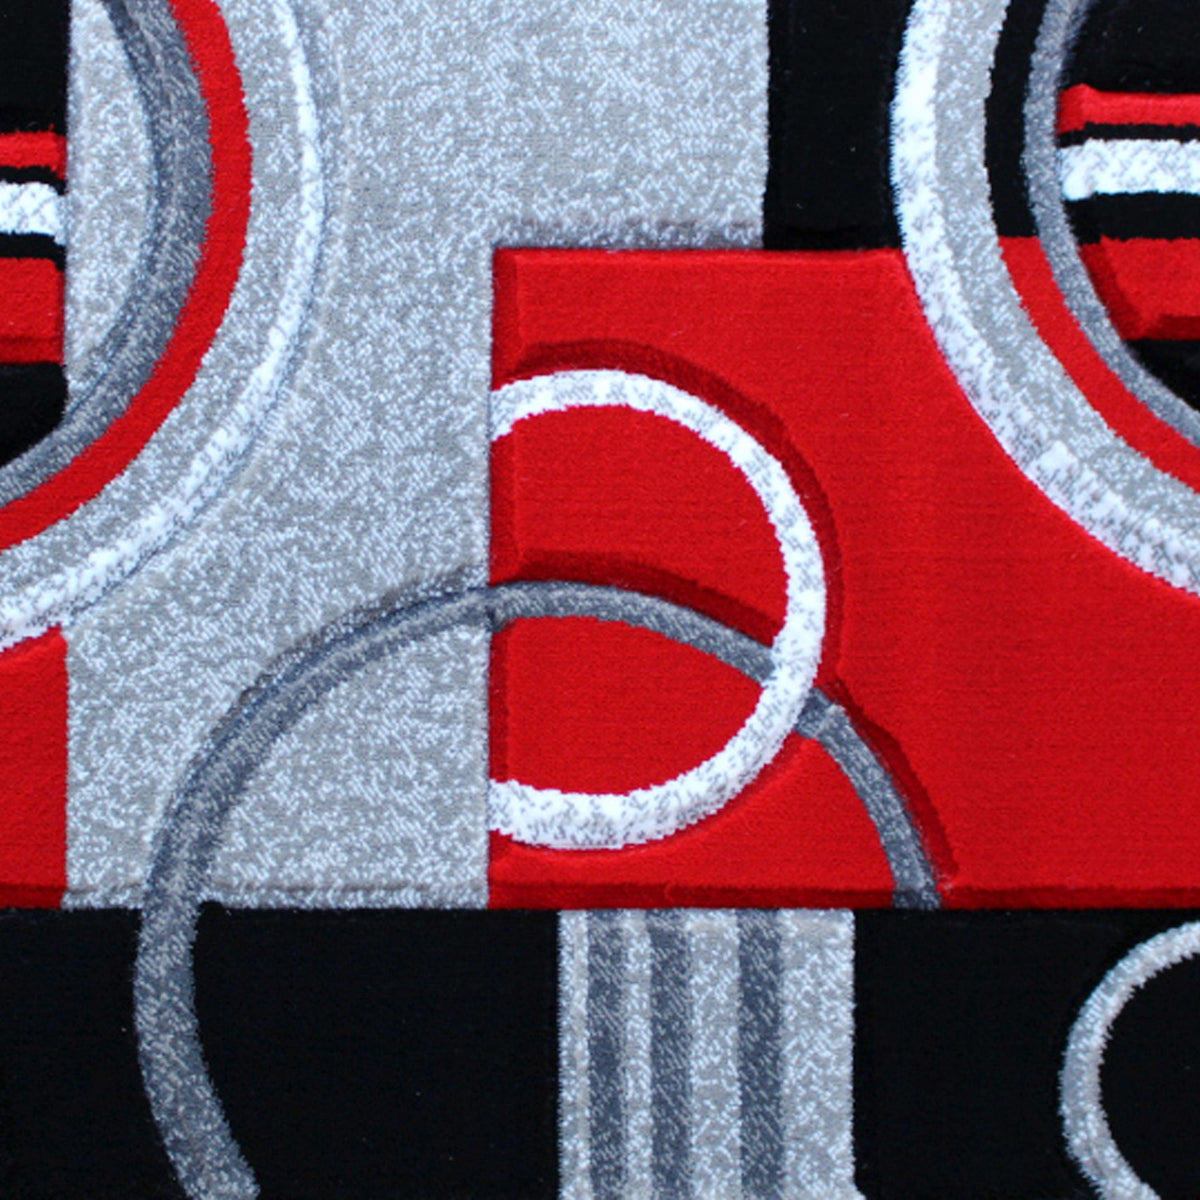 Red,3' x 10' |#| Modern Geometric Design Abstract Area Rug - Red, Black, & Gray - 3 x 10